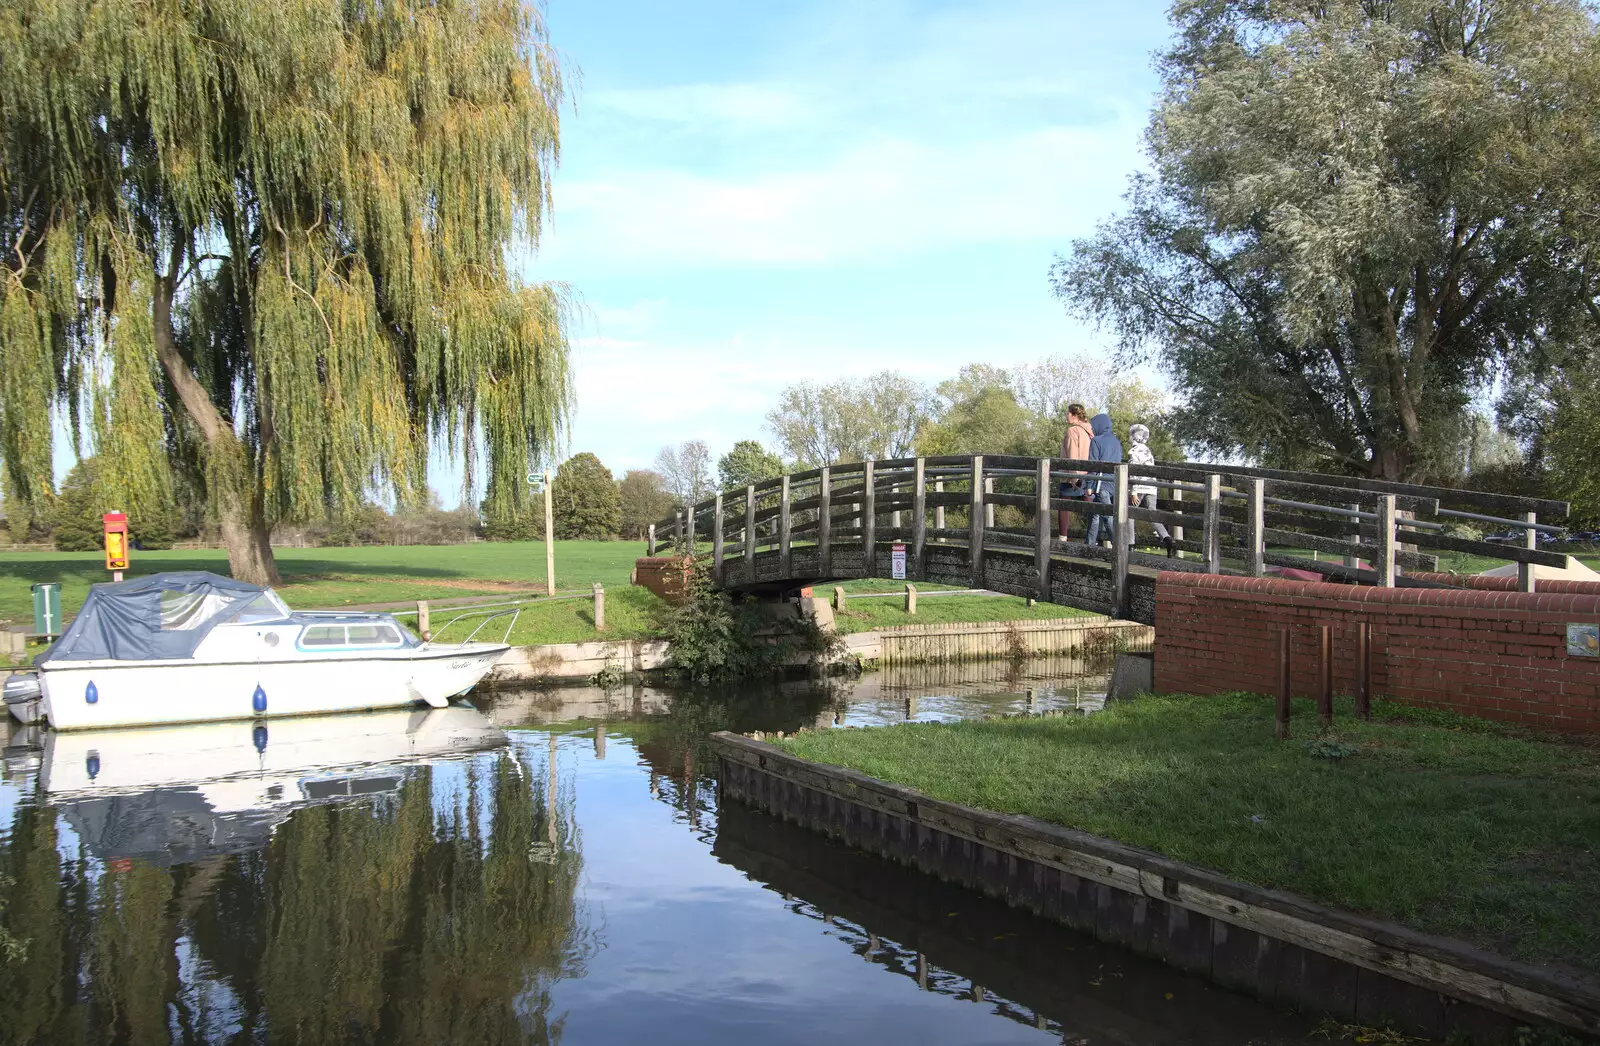 The gang walk over the bridge, from An Afternoon in Beccles, Suffolk - 26th October 2022